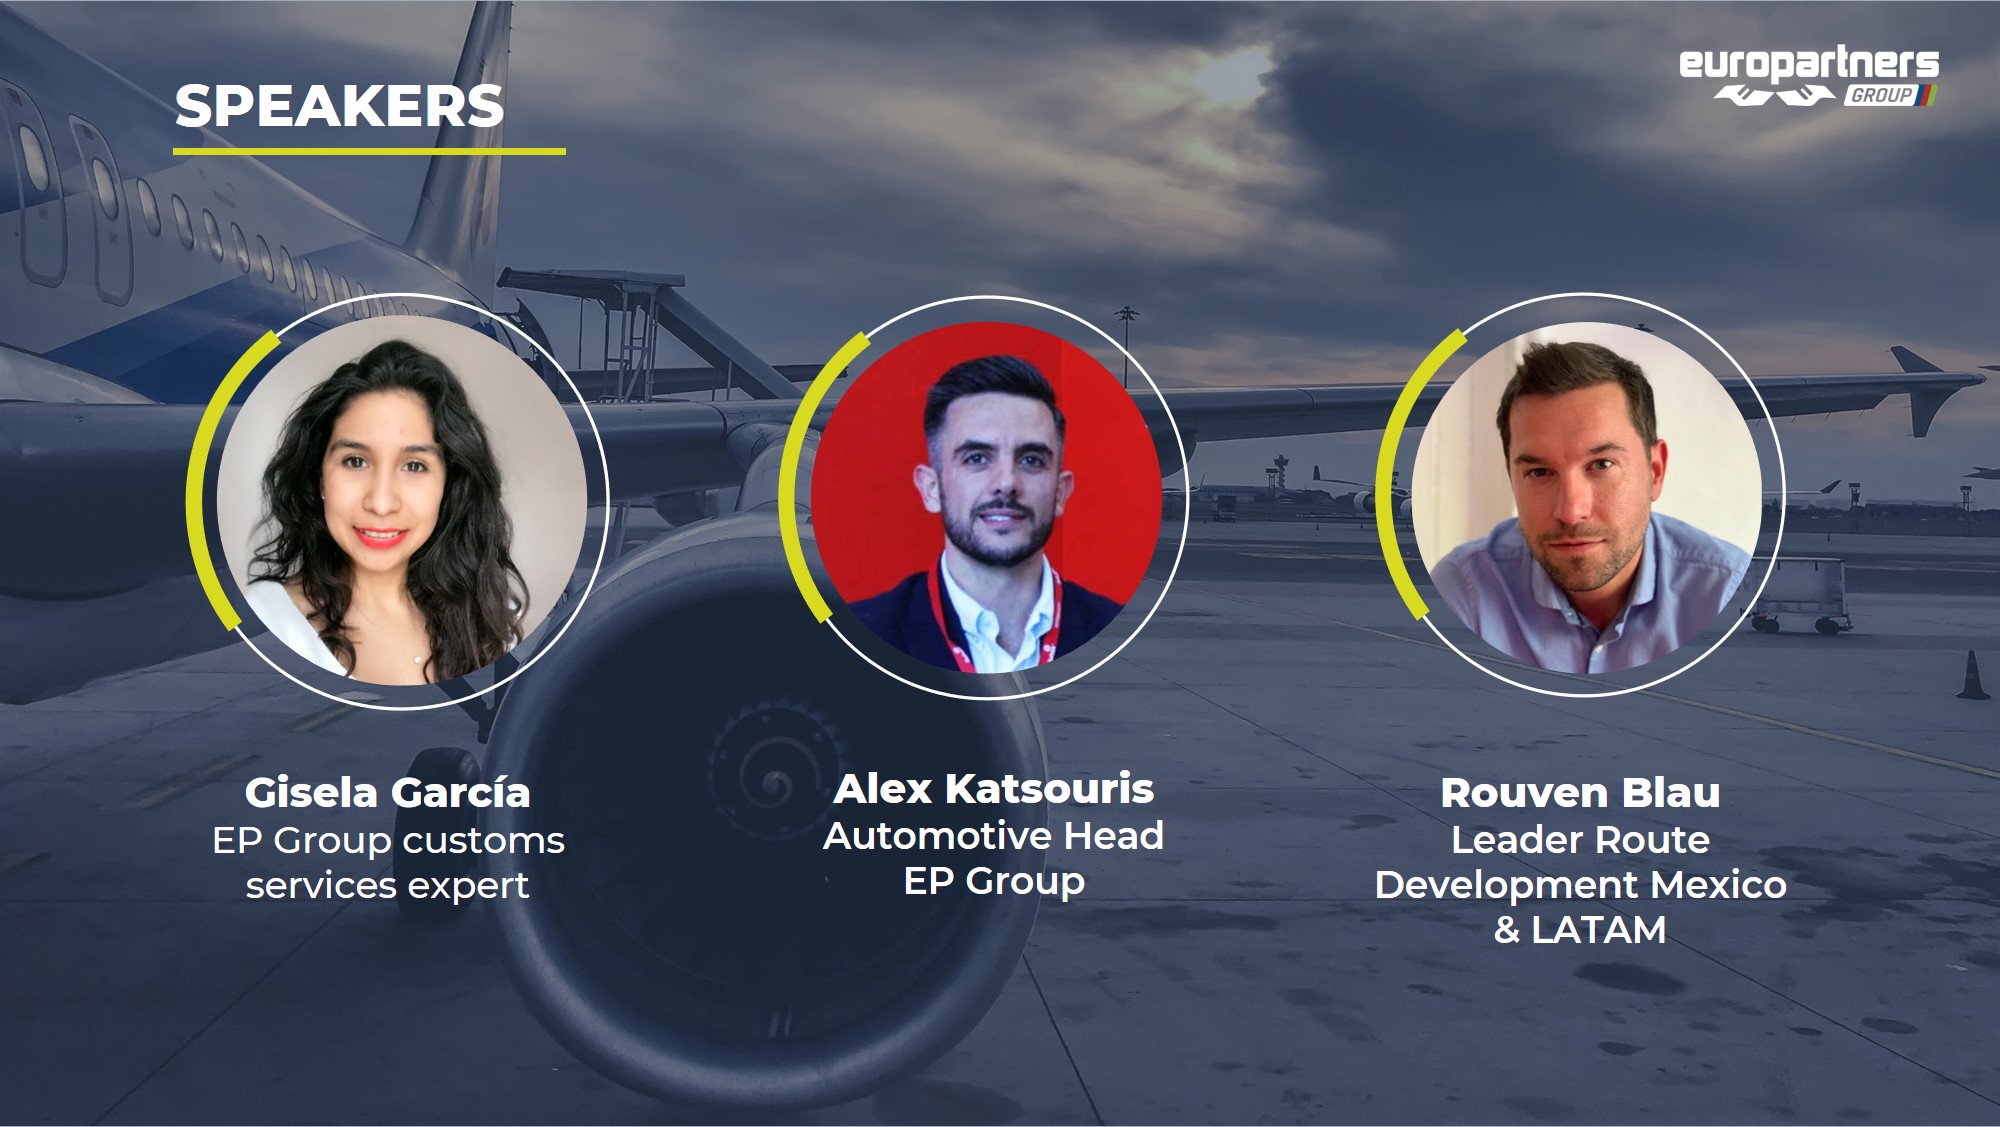 Webinar speakers were Gisela García, EP Group customs services expert, Alexander Katsouris, EP Automotive director and Rouven Blau, Leader Route development for Mexico and Latin America